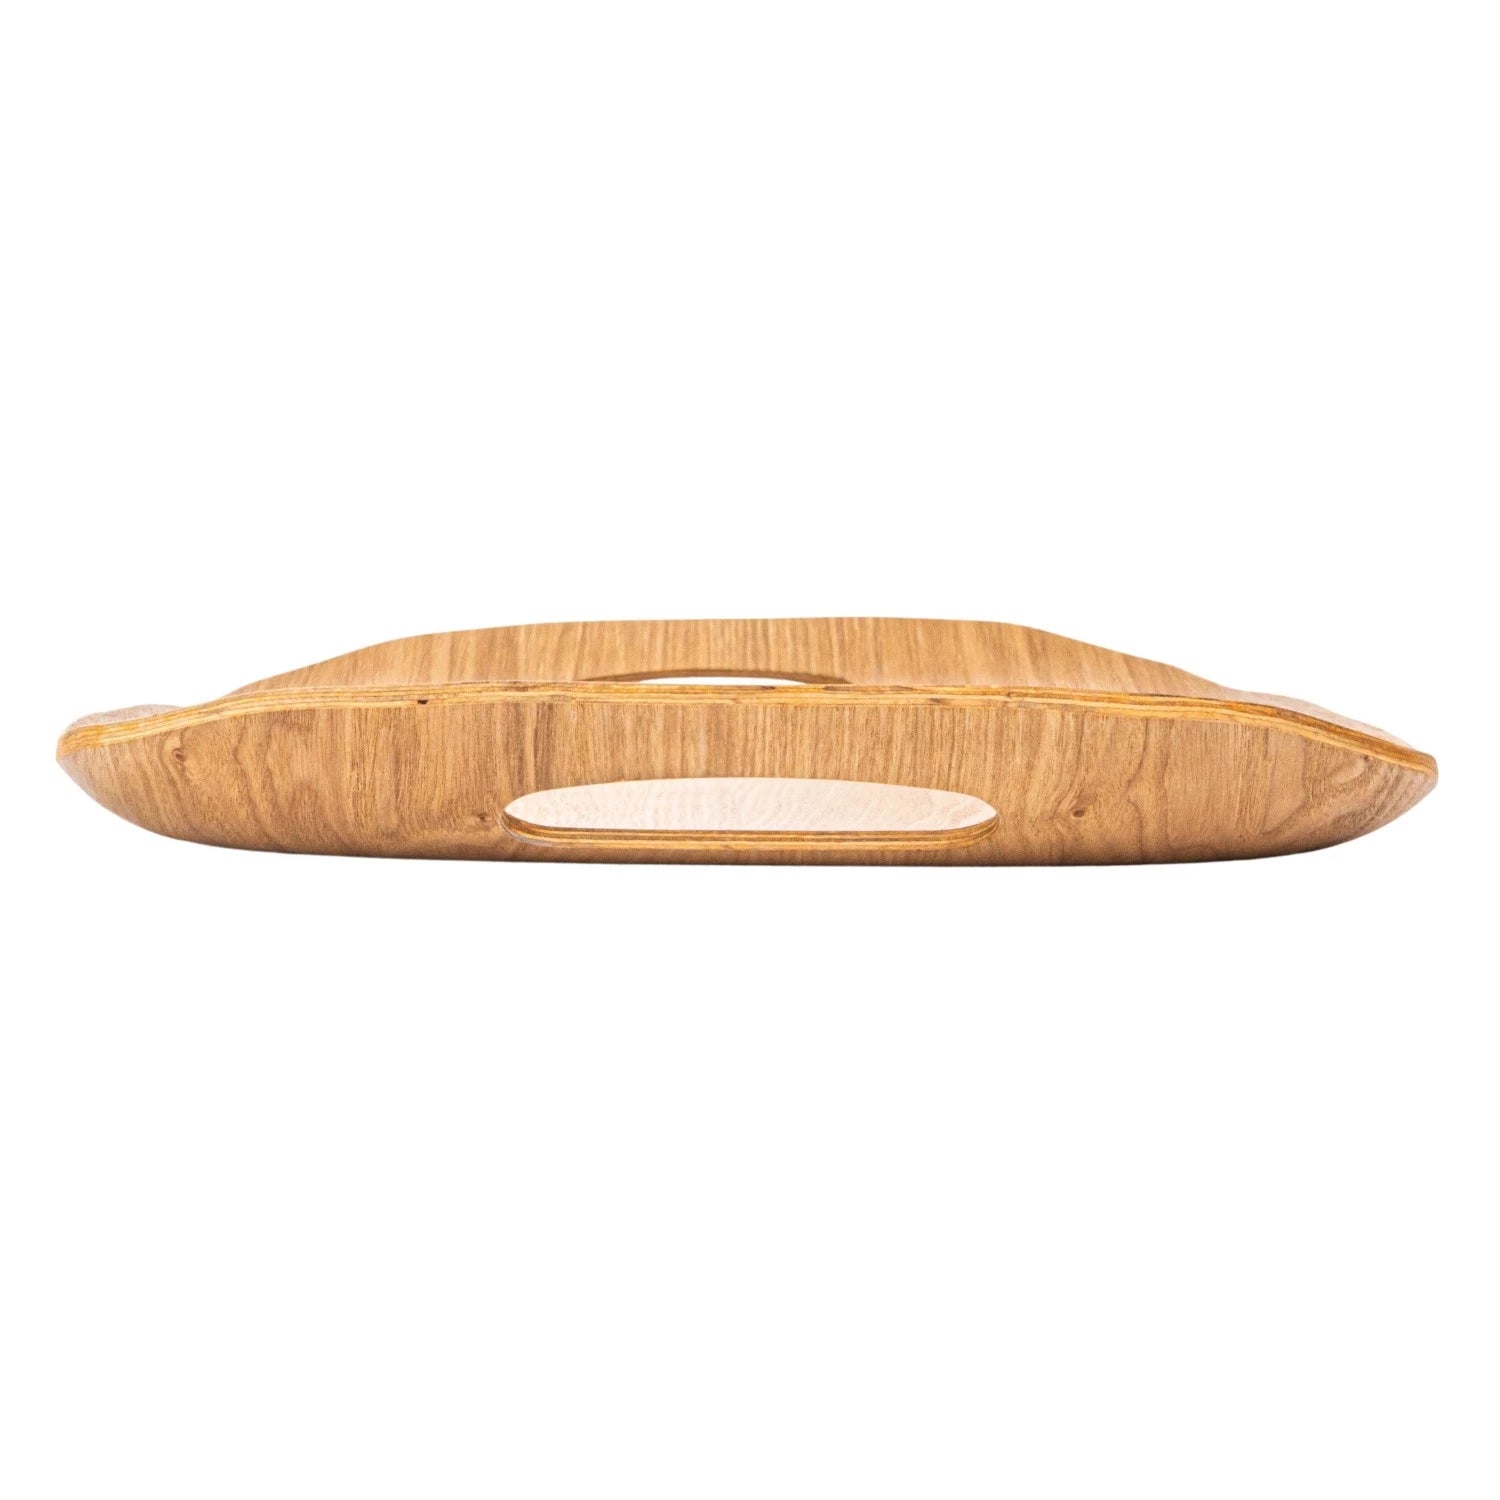 Natural Oak Wood Serving Tray with a Bungalow style, an oval shape, and a carved handle in the center, isolated on a white background by Bloomingville.